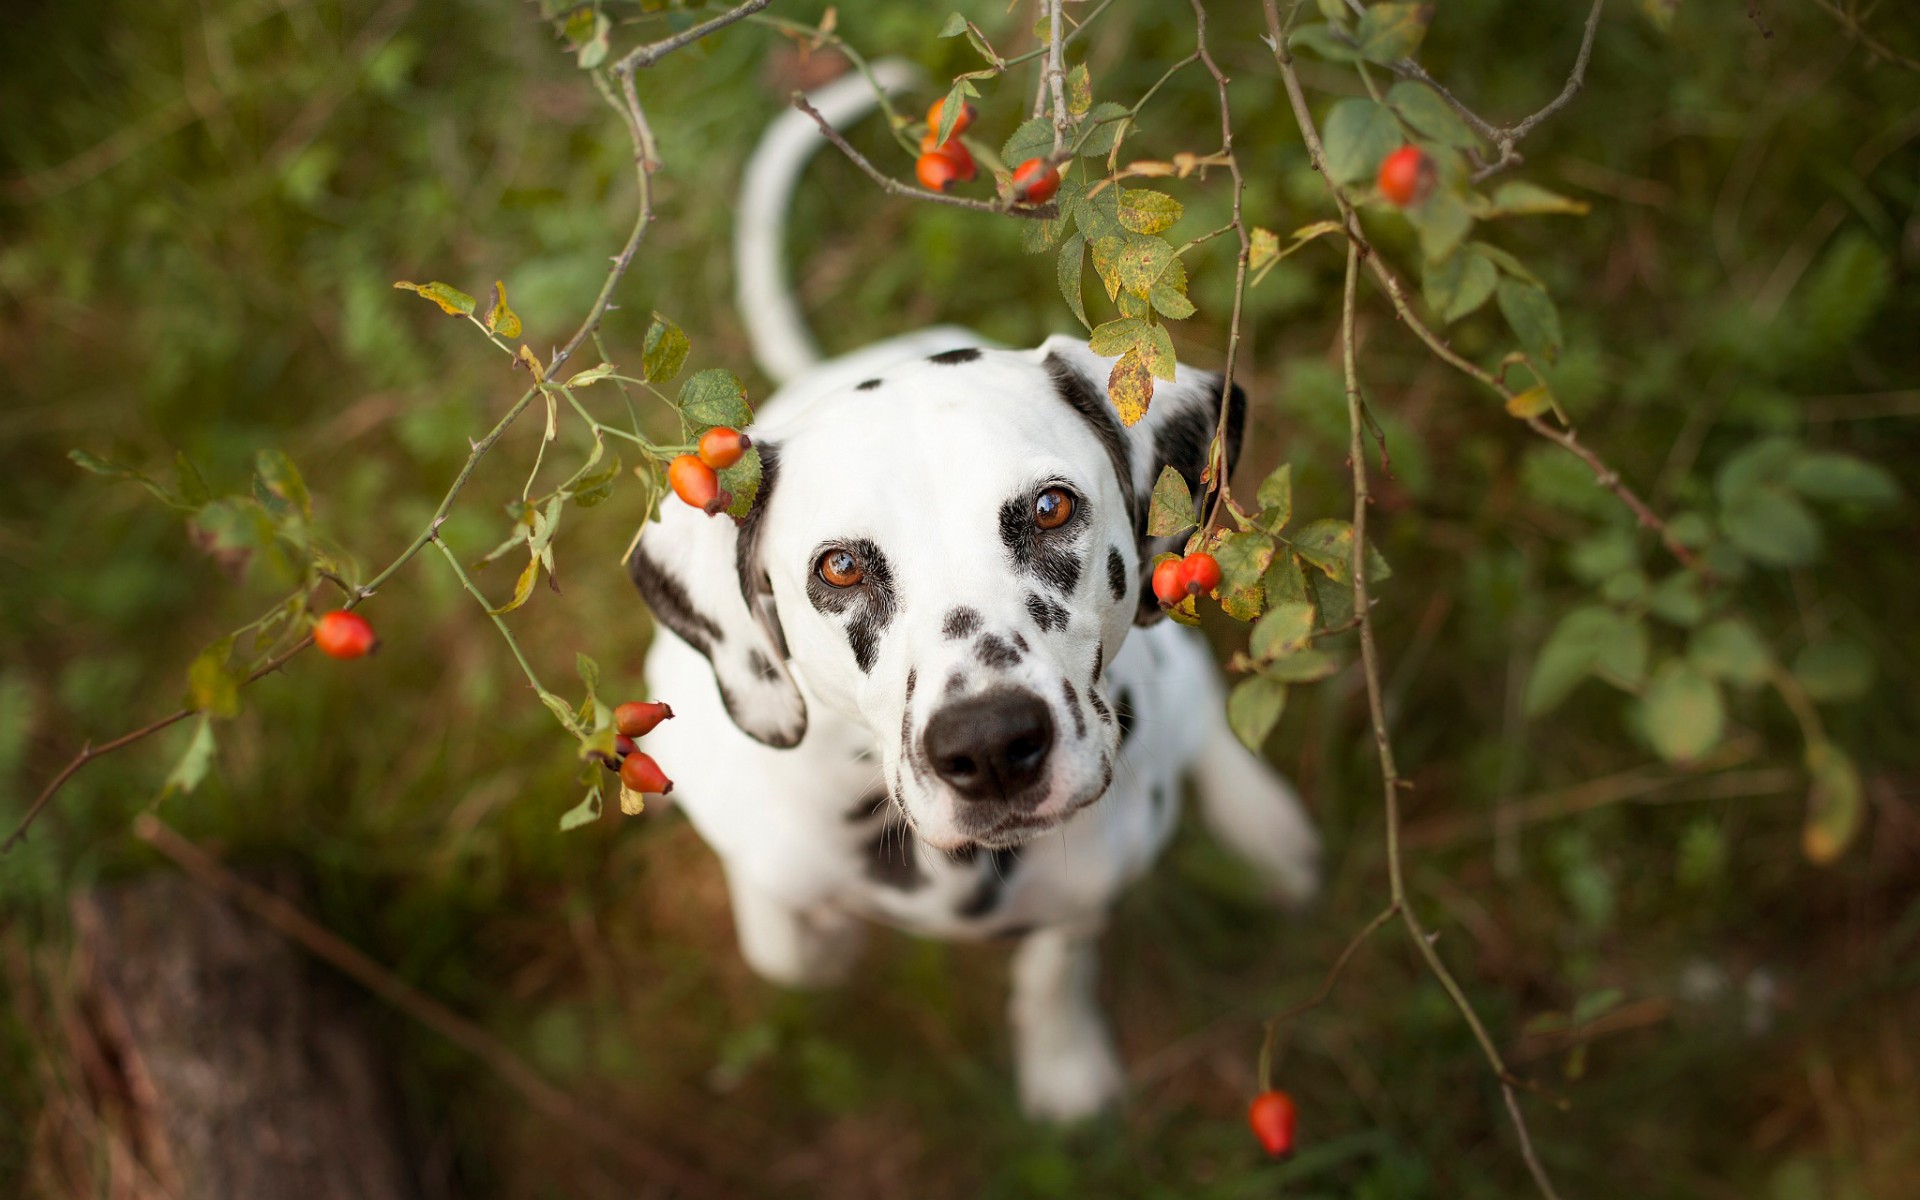 did you say cookies? by Hannah Meinhardt